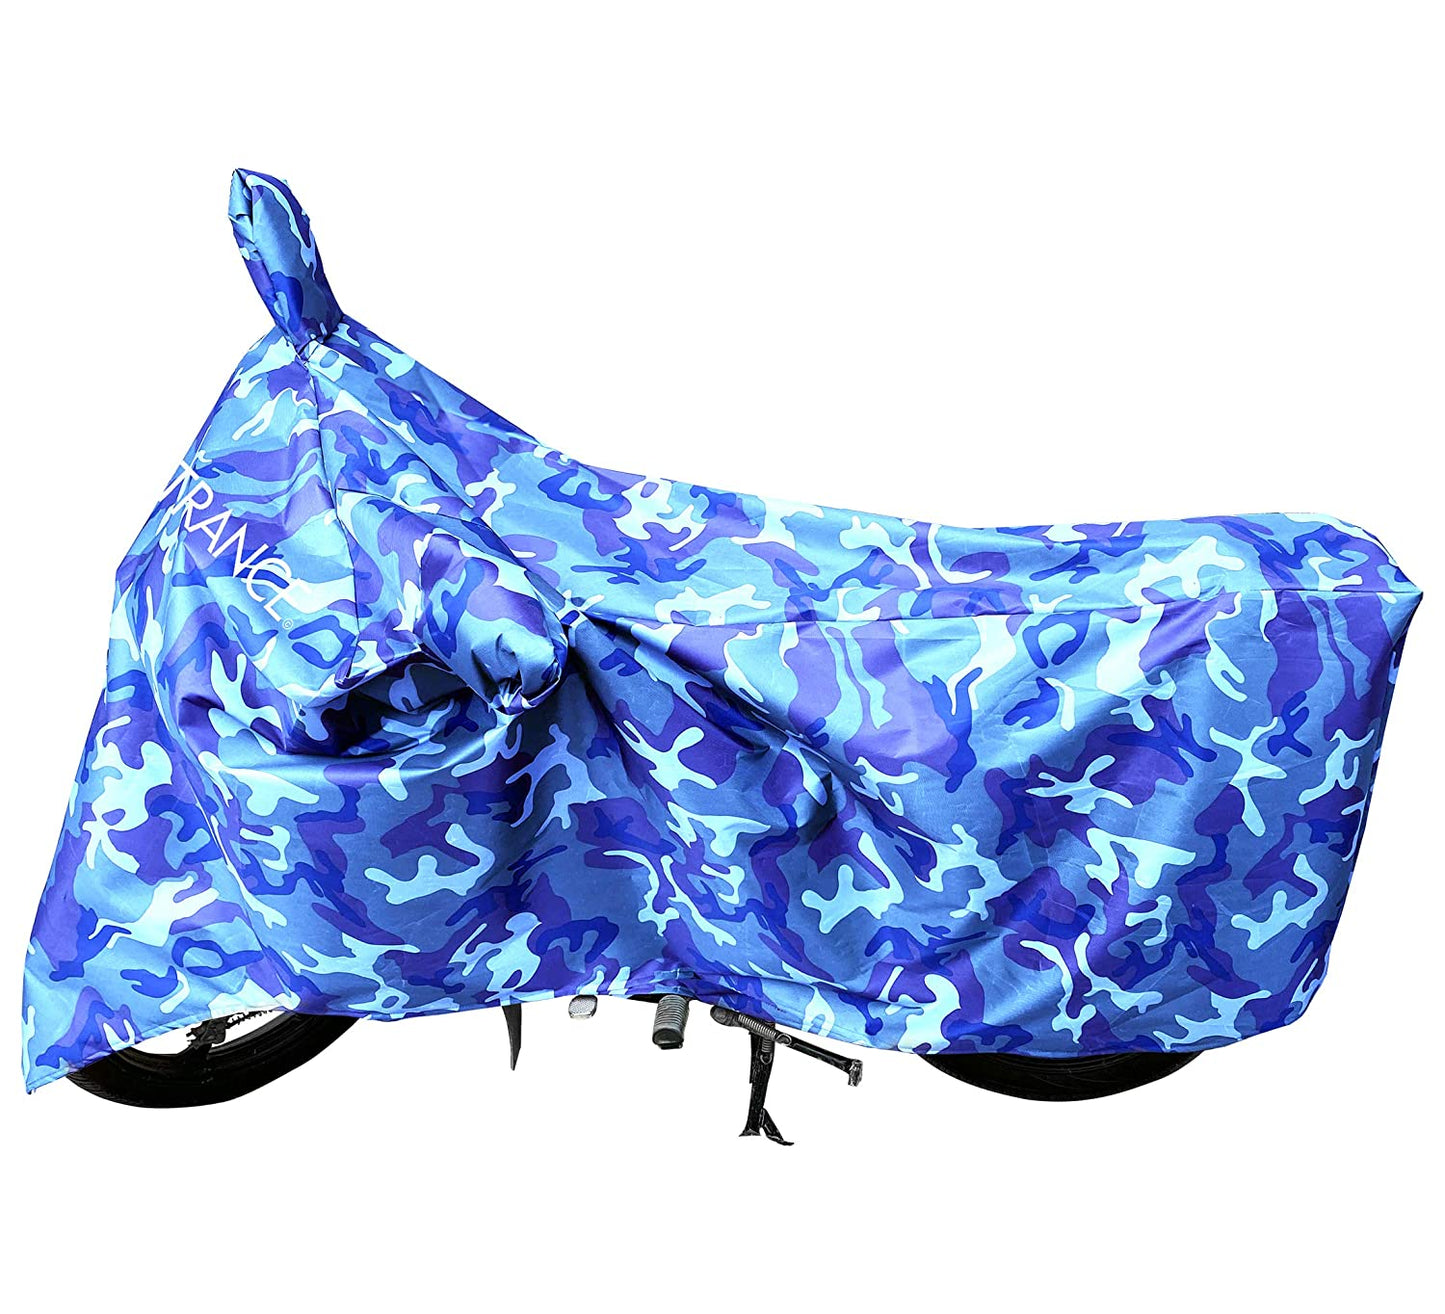 MotoTrance Jungle Bike Body Covers For Yamaha Vmax - Interlock-Stitched Waterproof and Heat Resistant with Mirror Pockets